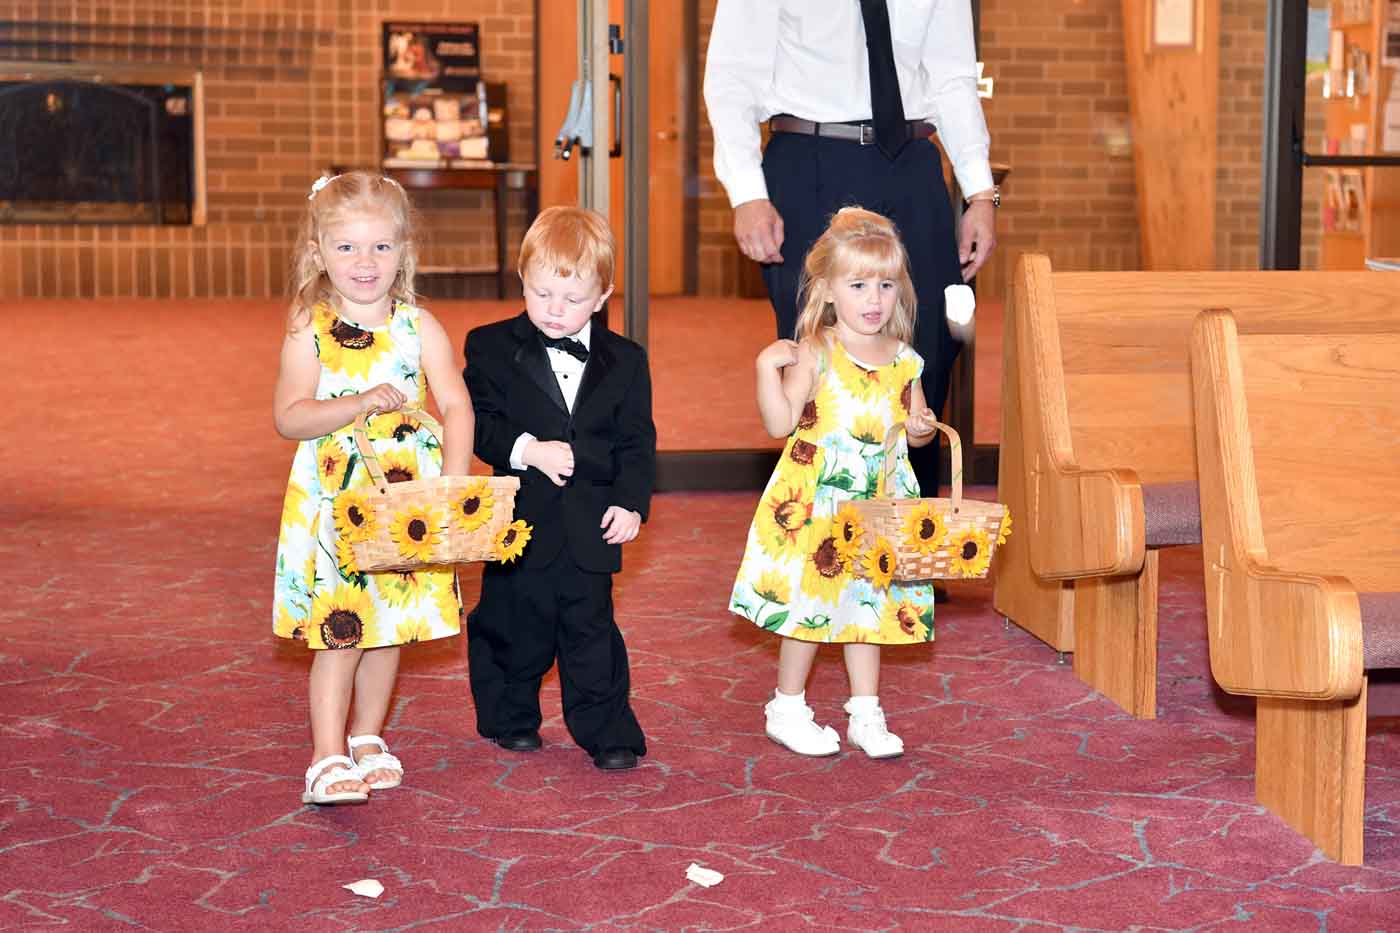 Flower girls and boy in suit entering church